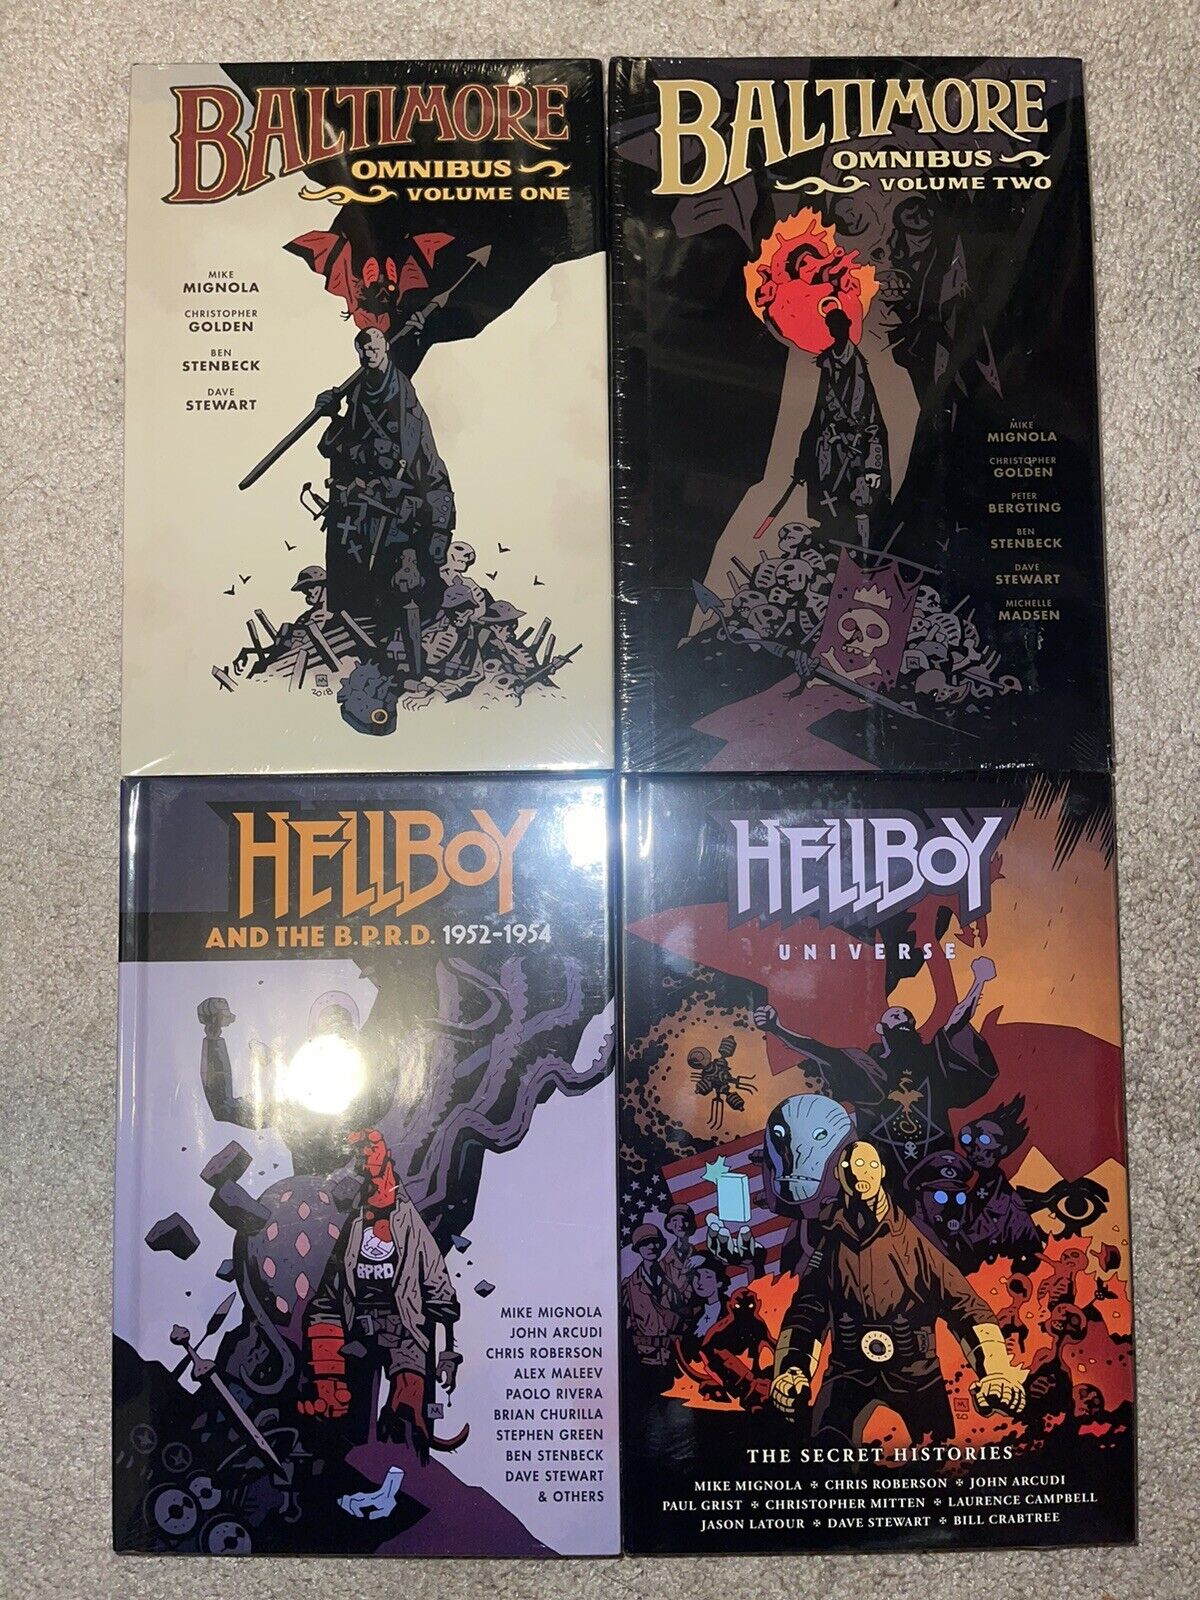 Baltimore Omnibus Vol 1 & 2, The Secret Histories, Hellboy And The B.P.R.D 52-54